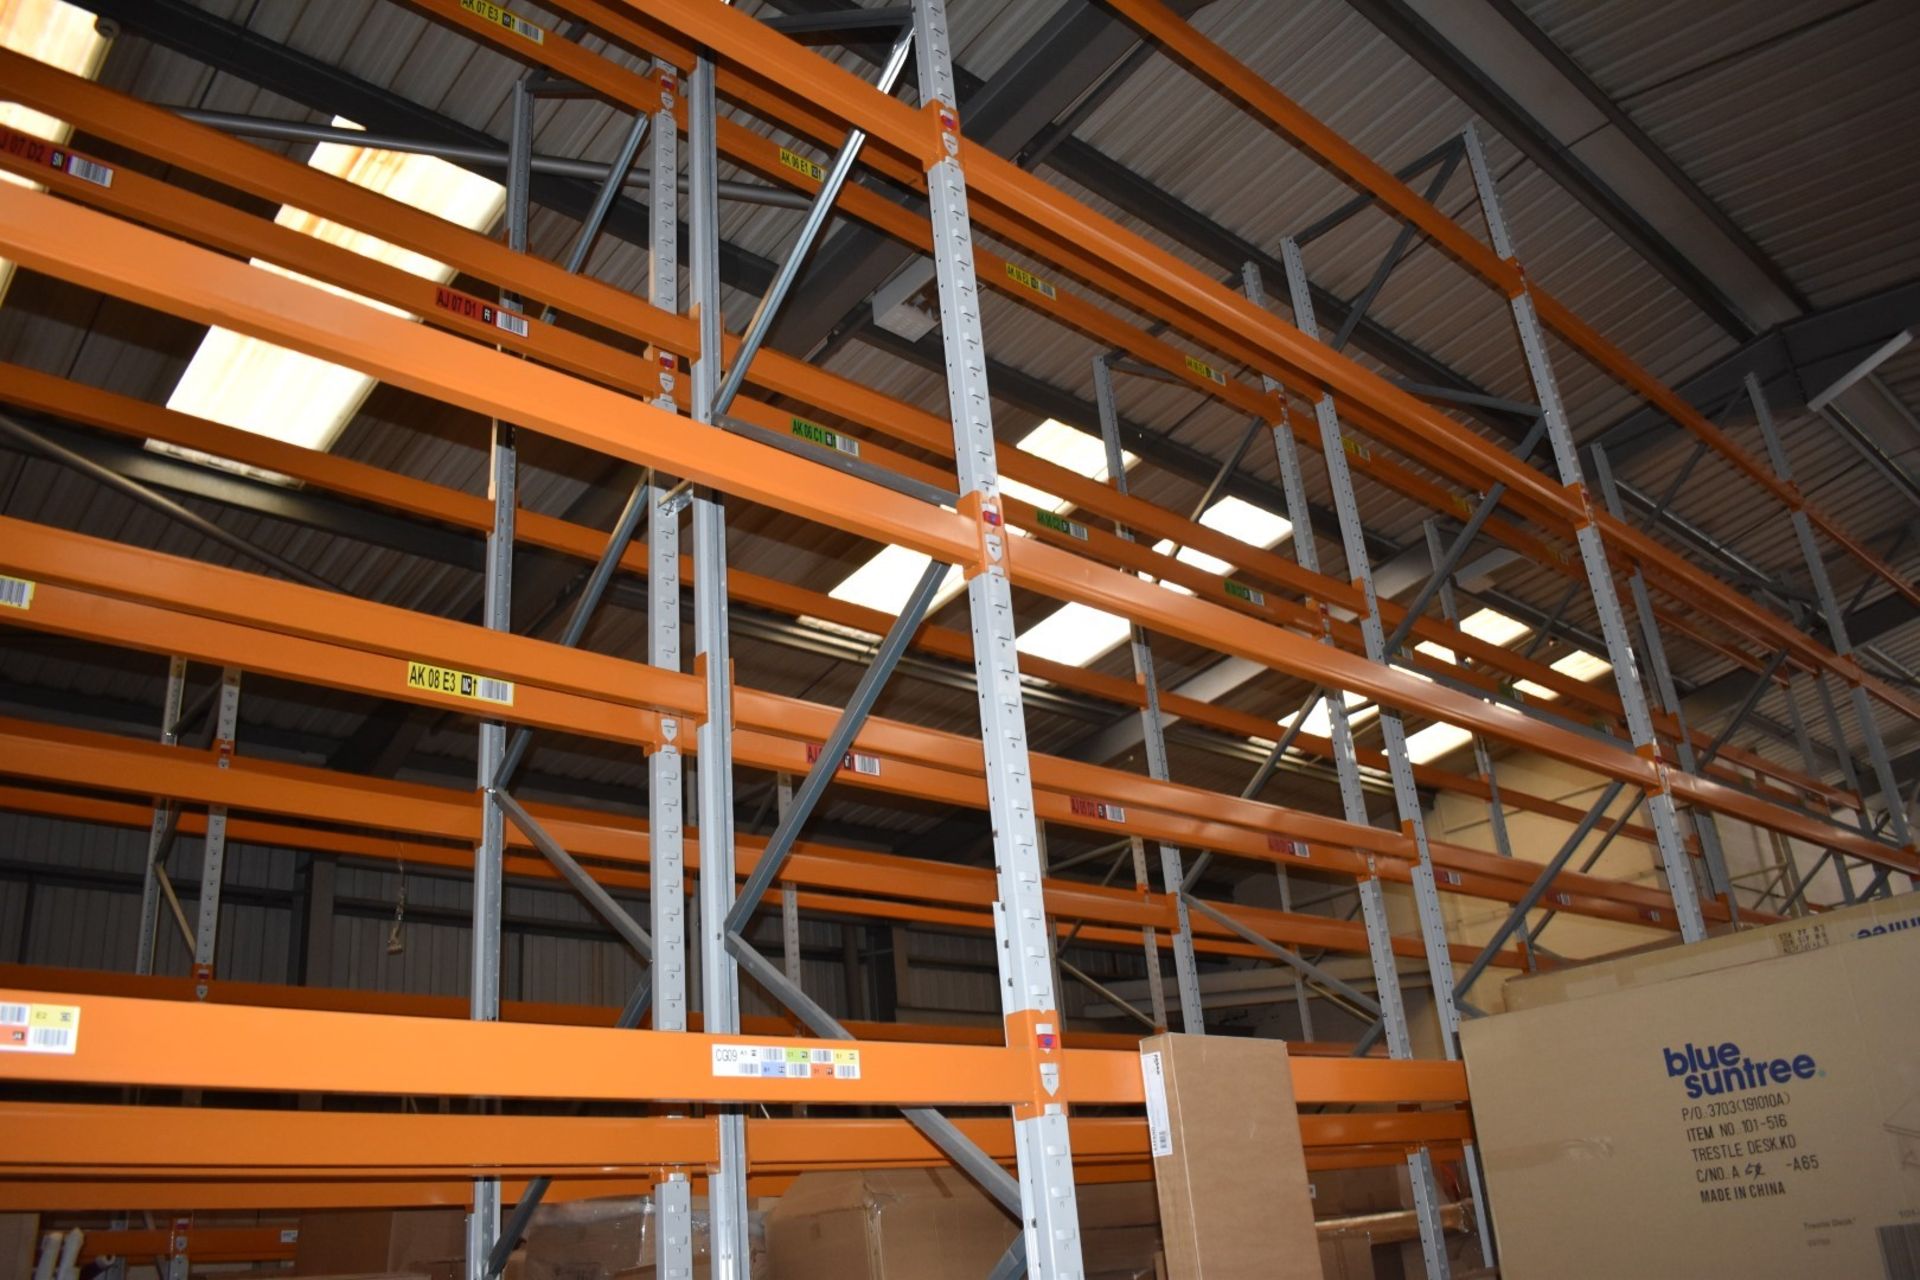 9 x Bays of Apex Pallet Racking - Includes 10 x Apex 16 UK 16,000kg Capacity Uprights and 60 x - Image 19 of 19